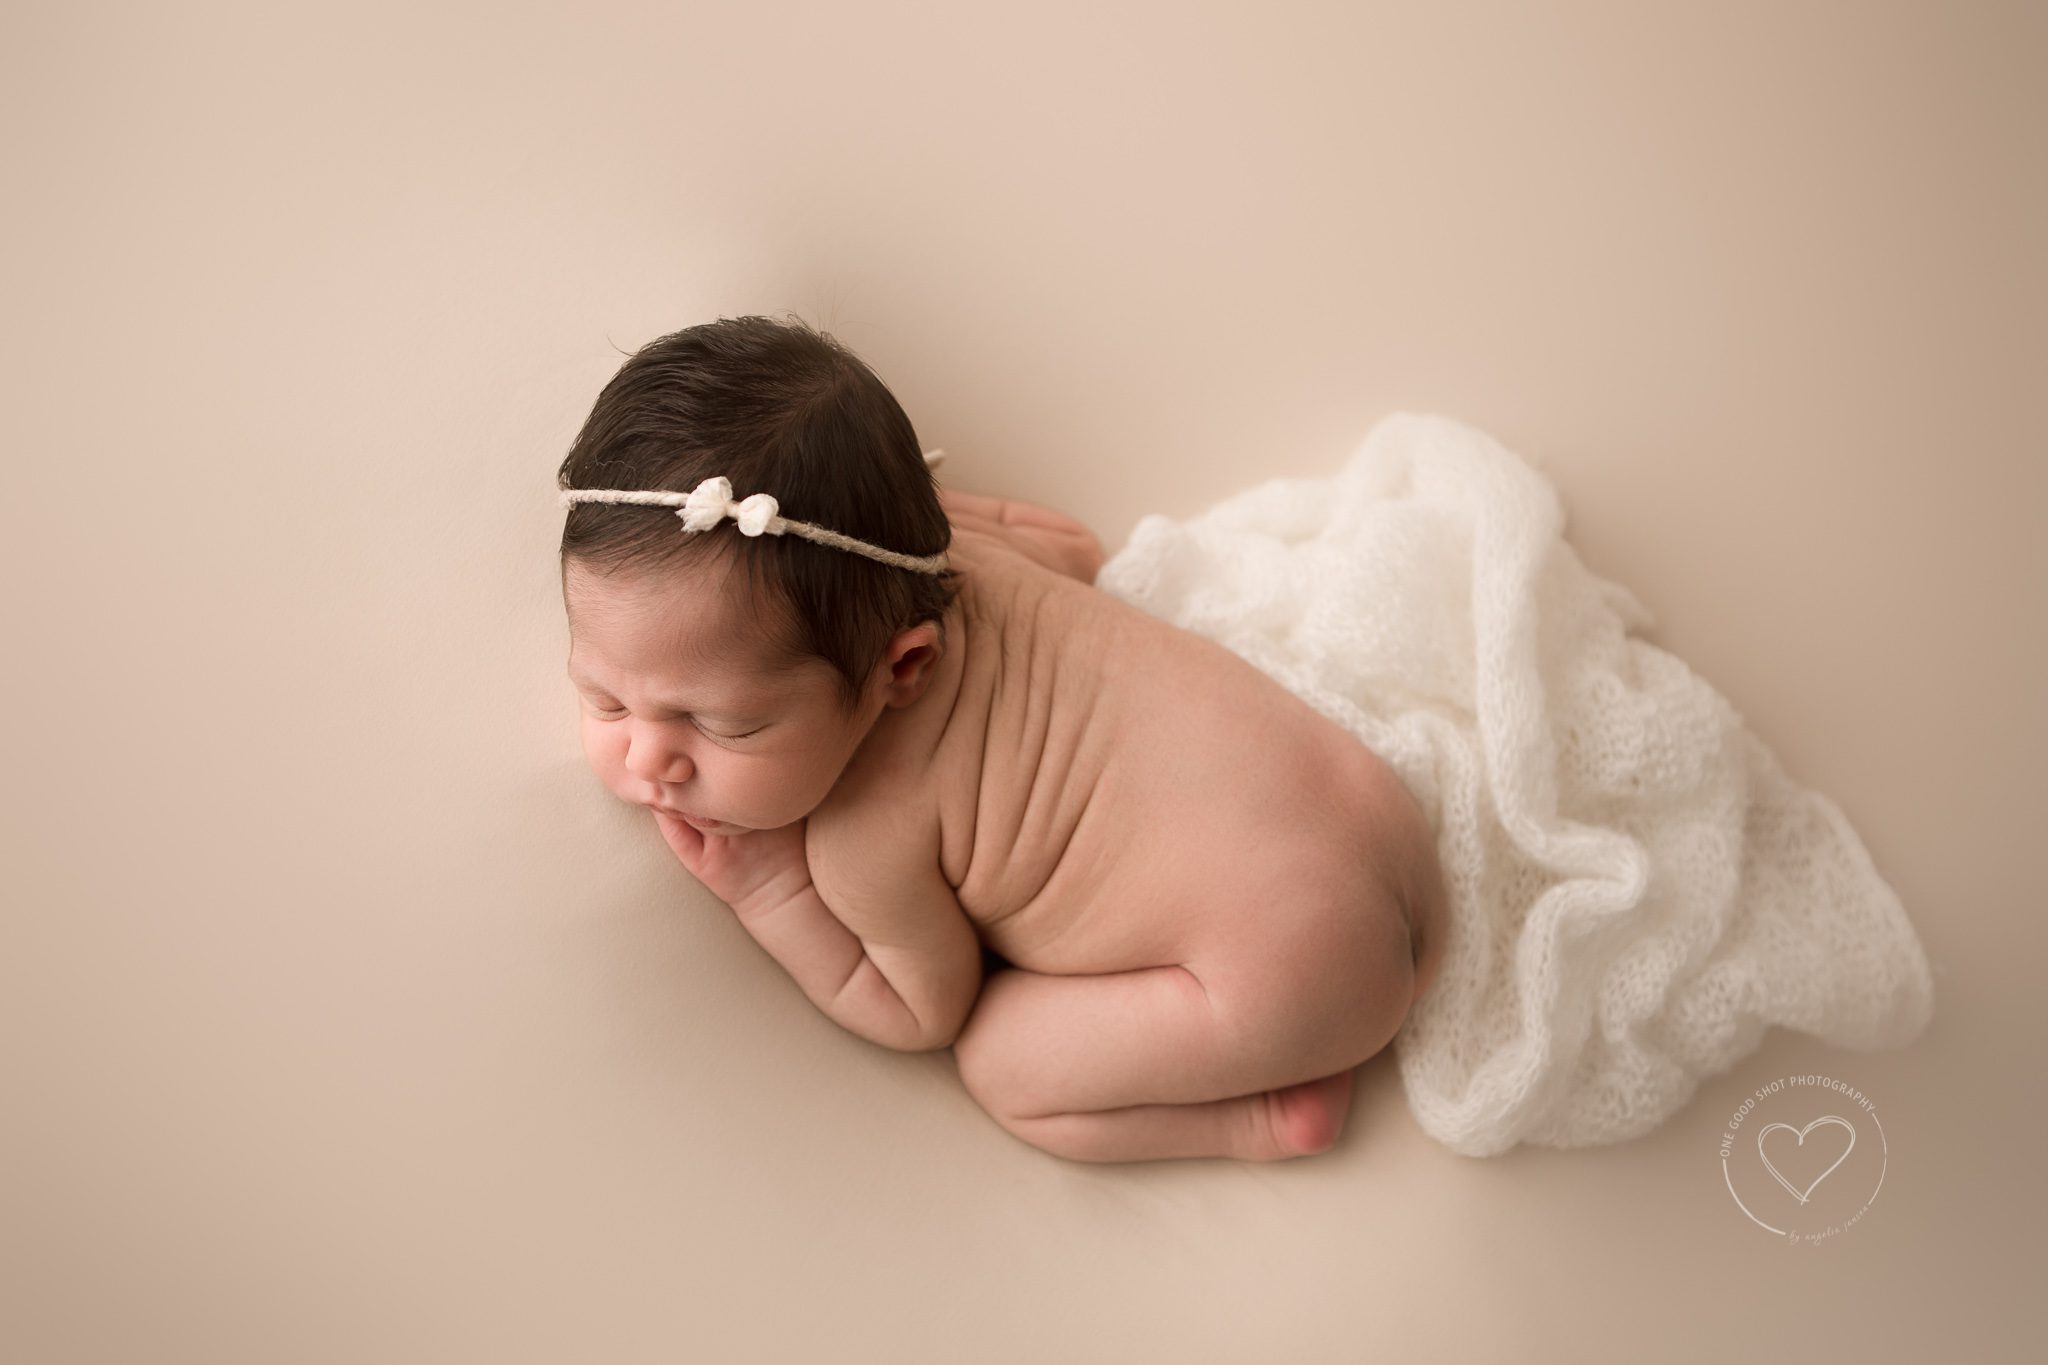 newborn girl photo, baby bum up pose shot from above, neutral colors, fresno, clovis, photographer, one good shot photography